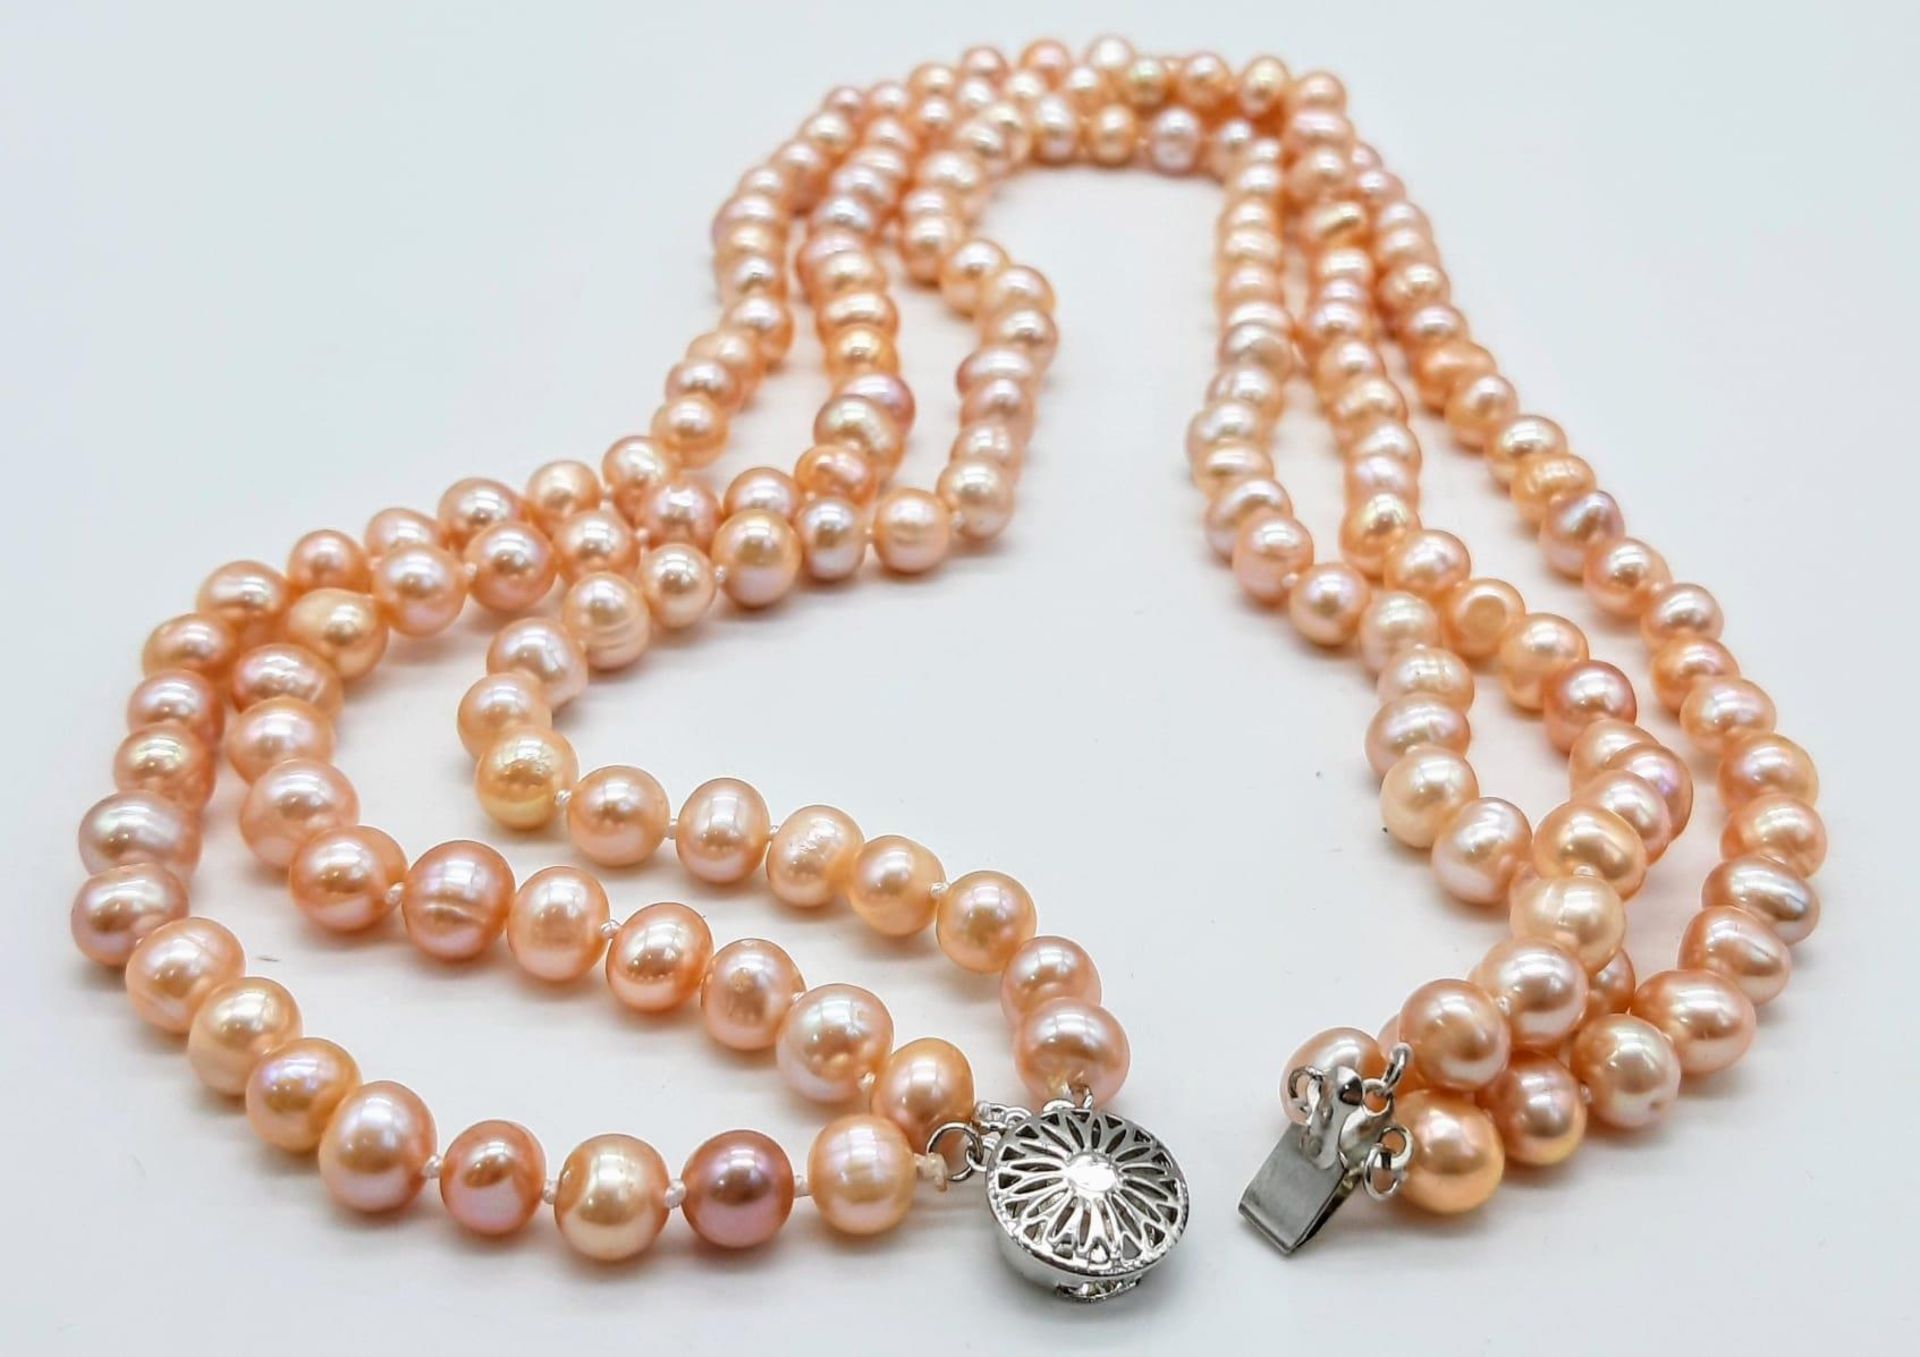 A fashionable three strand of high quality, natural pink pearls necklace, bracelet and earrings - Image 3 of 6